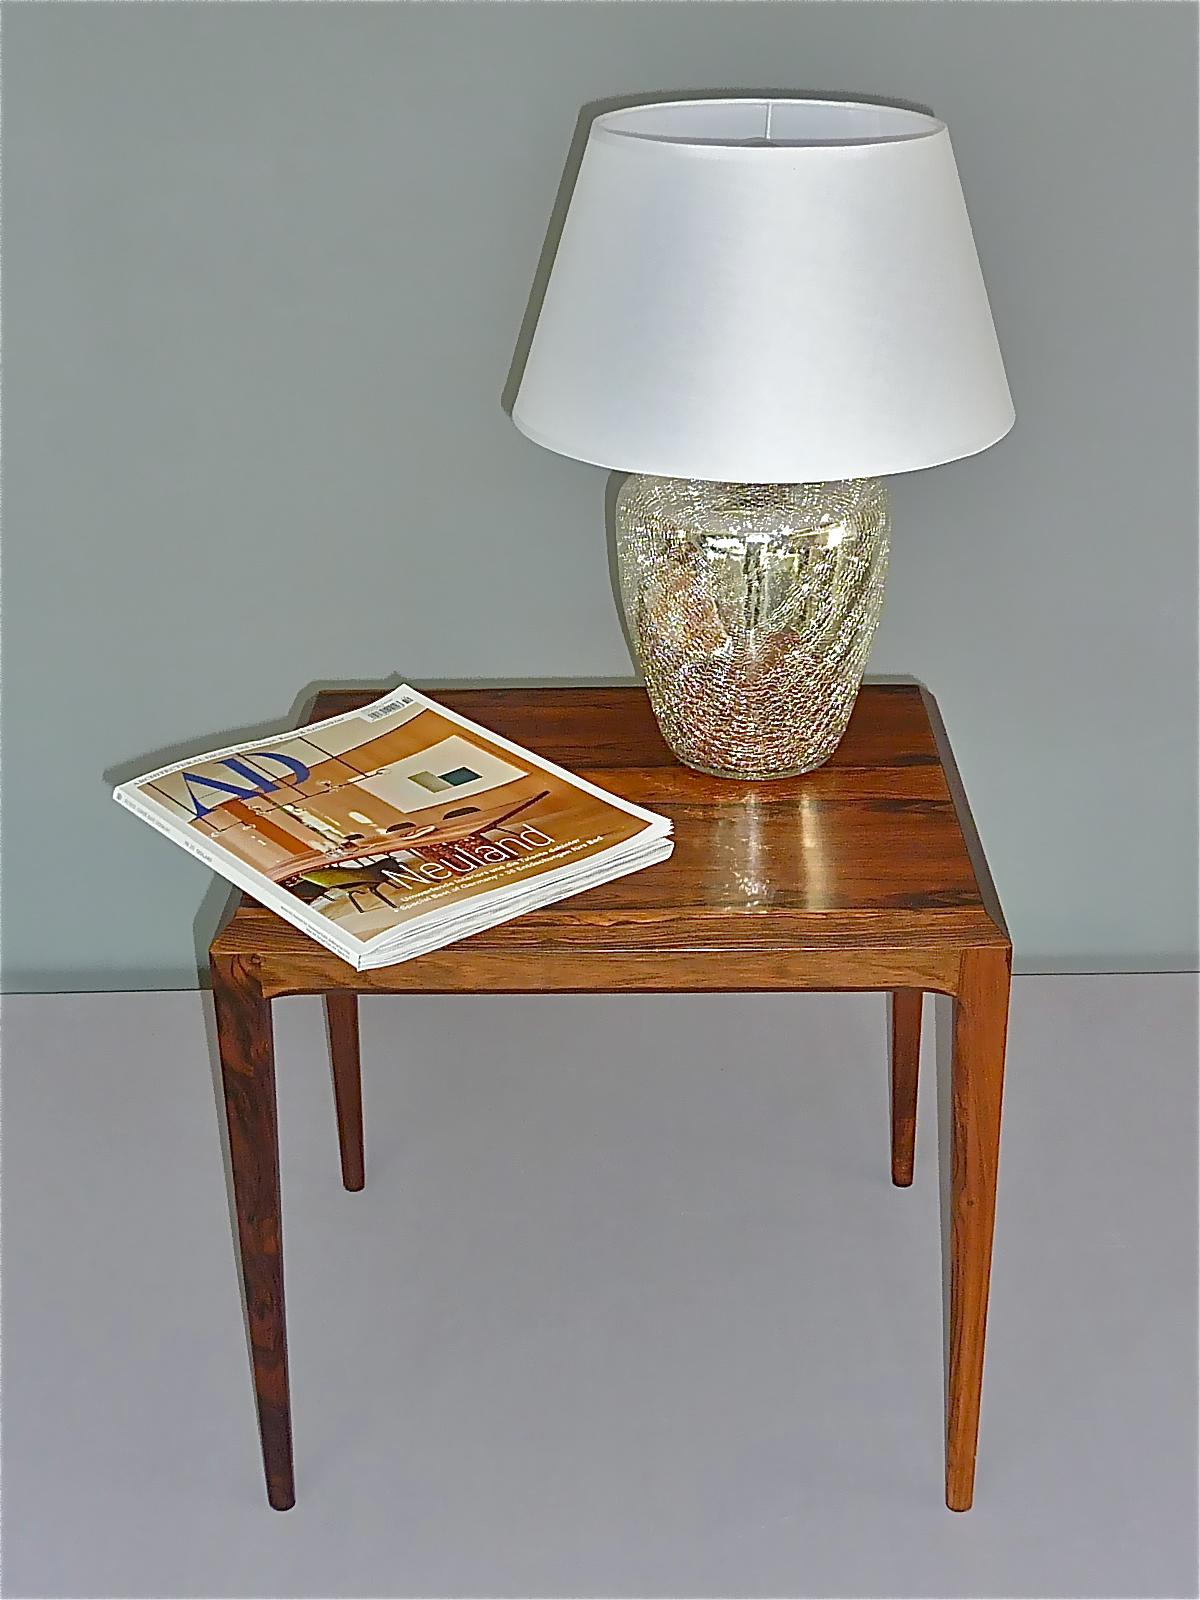 Rare Silver Art Deco Table Lamp Crackle Glass White Fabric Modernism France 1930 For Sale 8